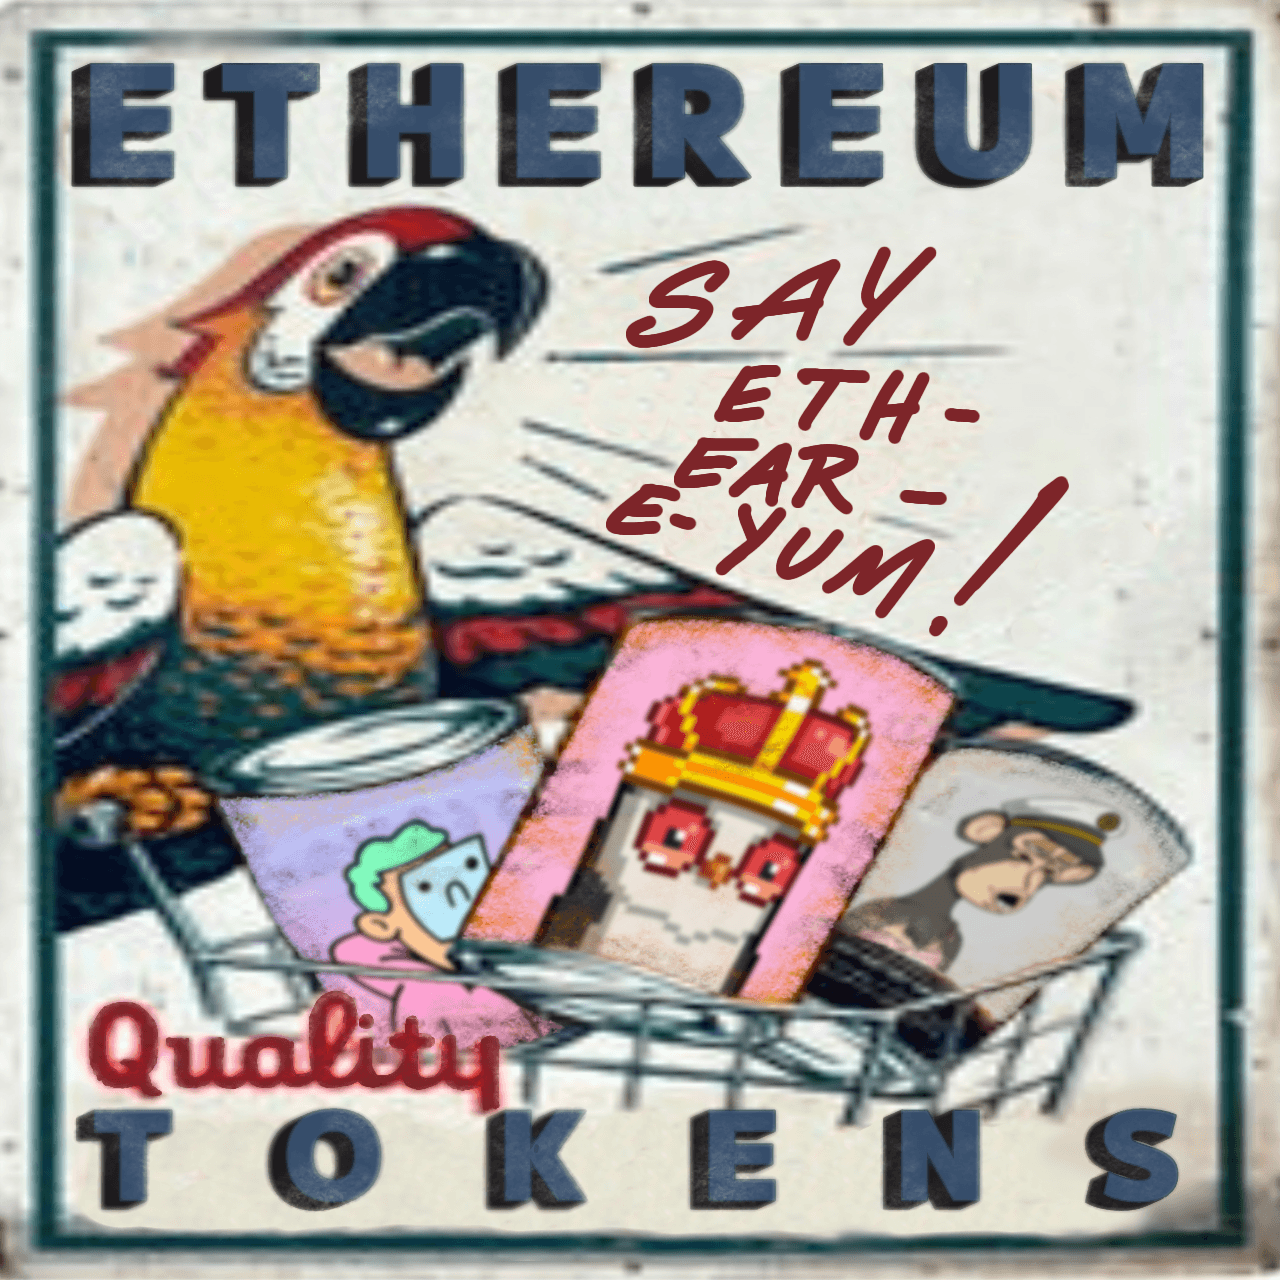 Quality Tokens